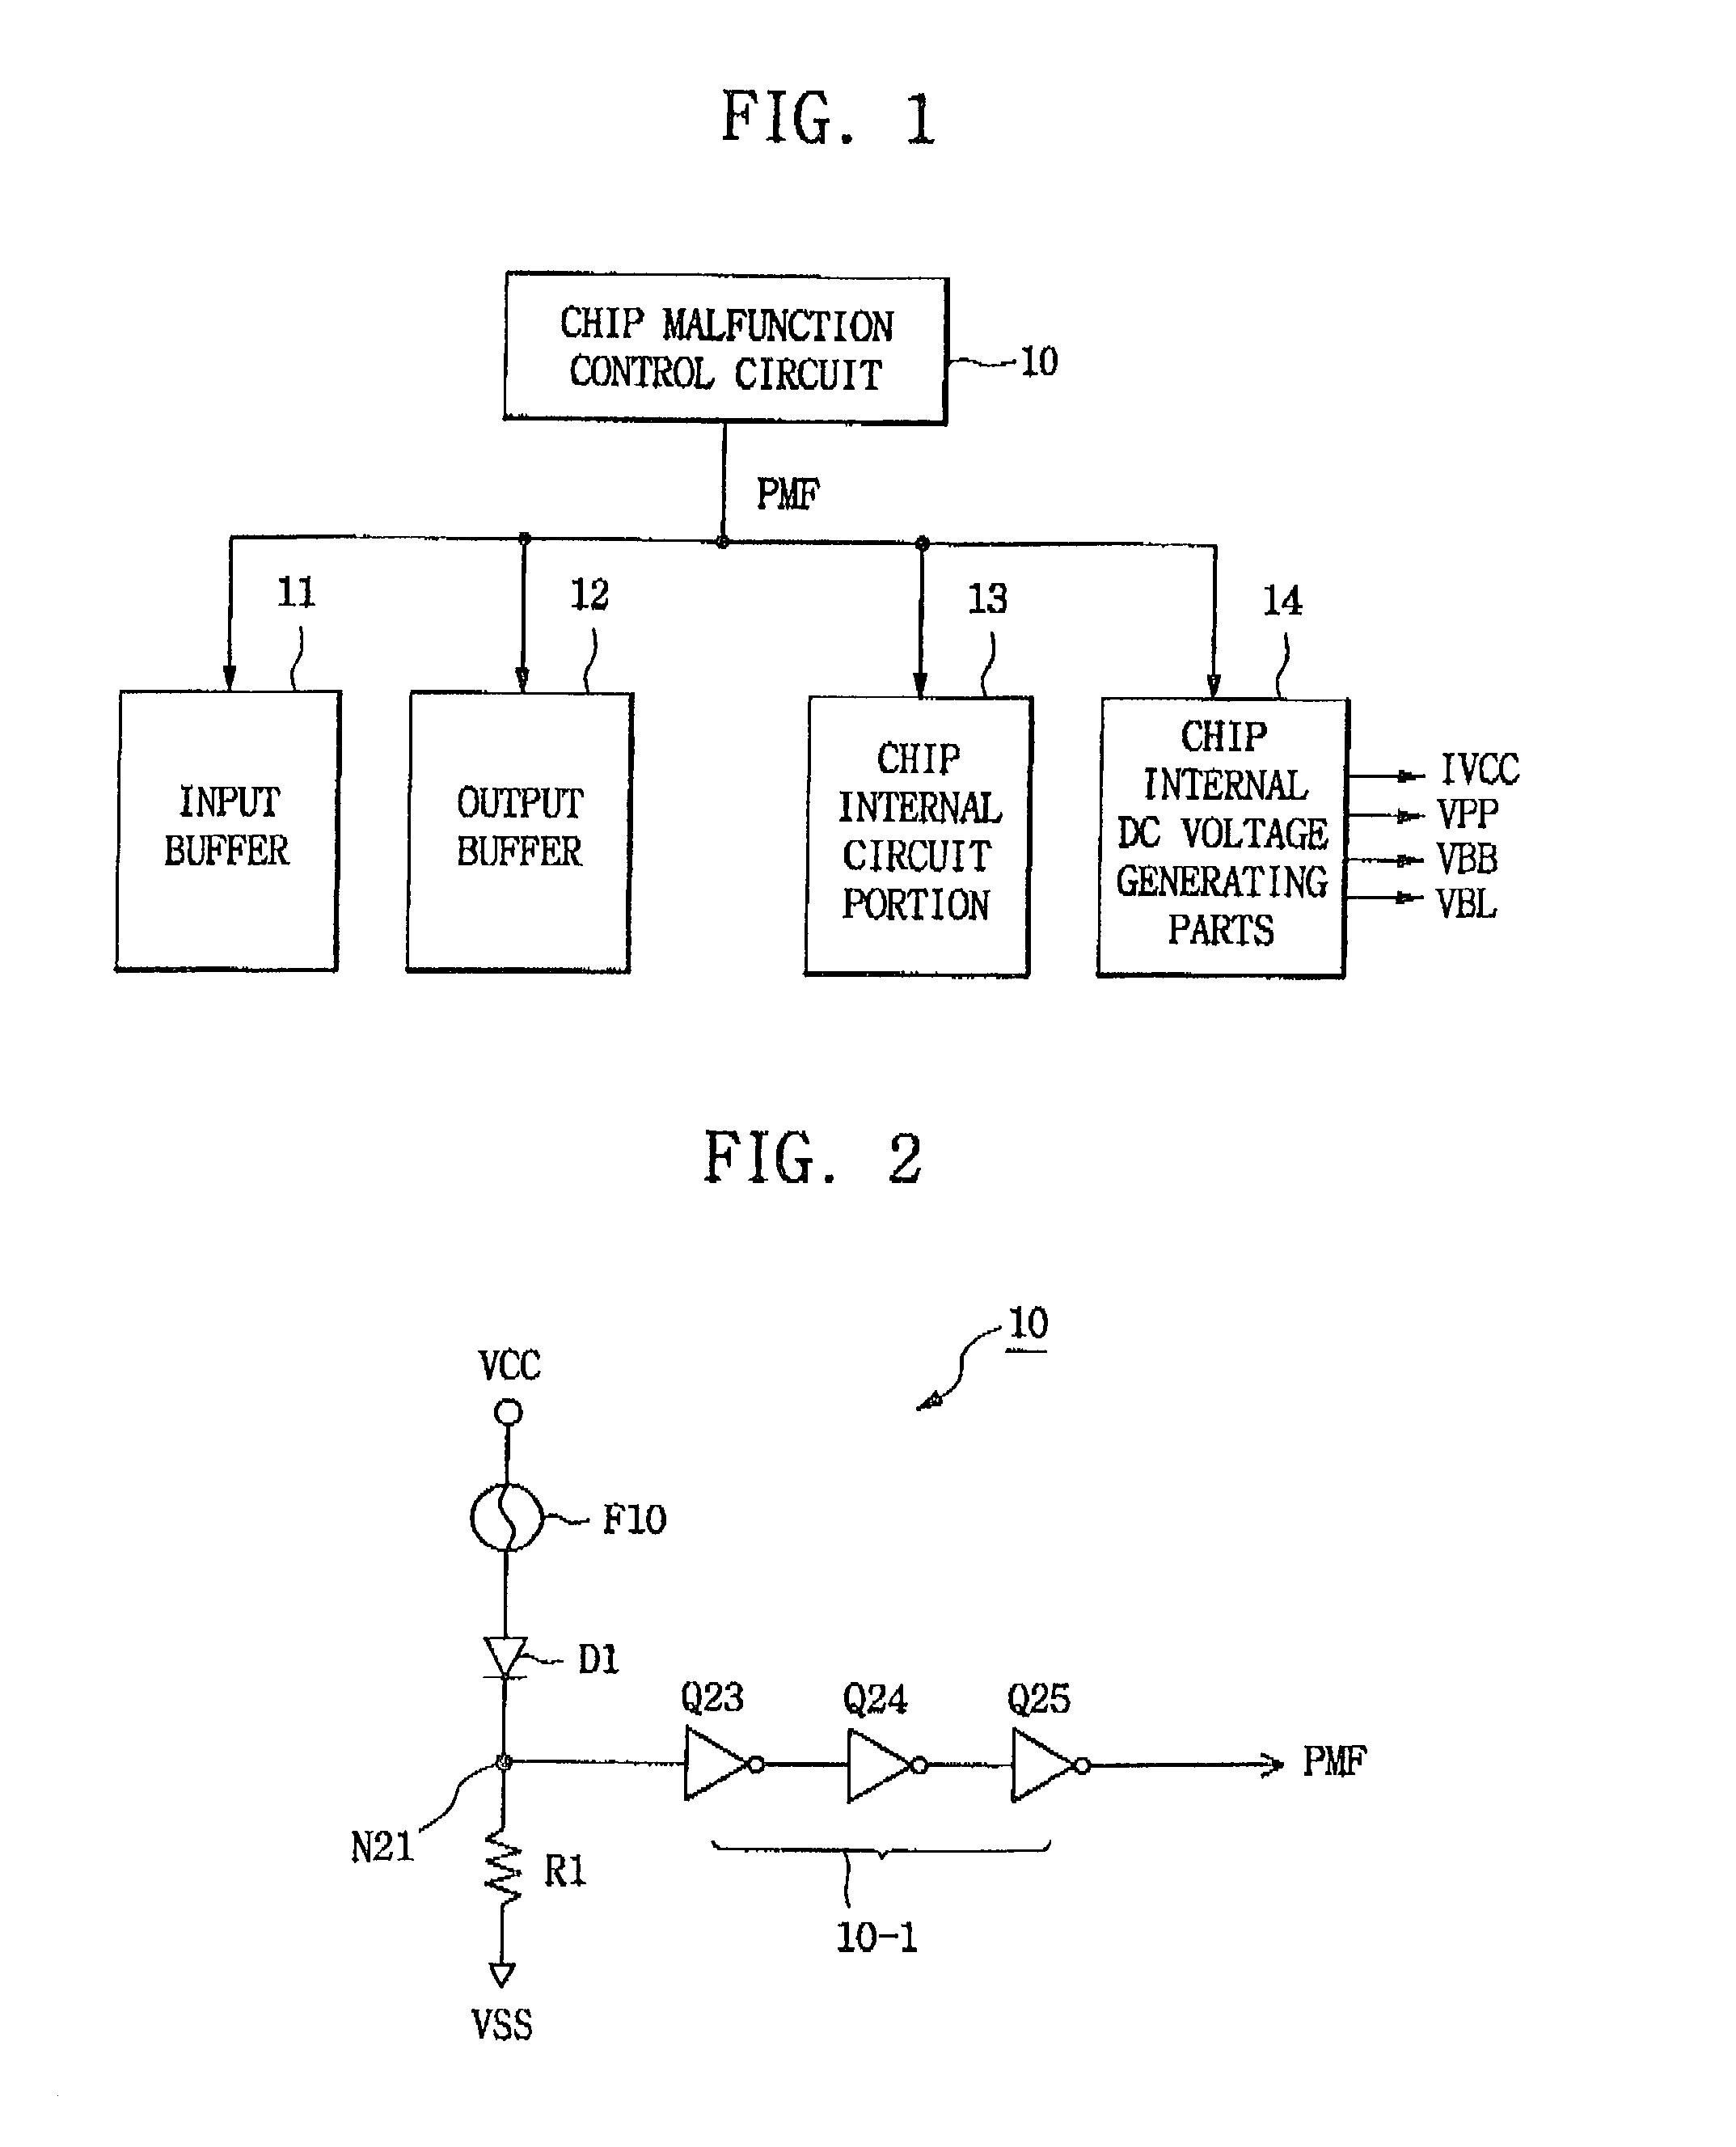 Semiconductor device with malfunction control circuit and controlling method thereof